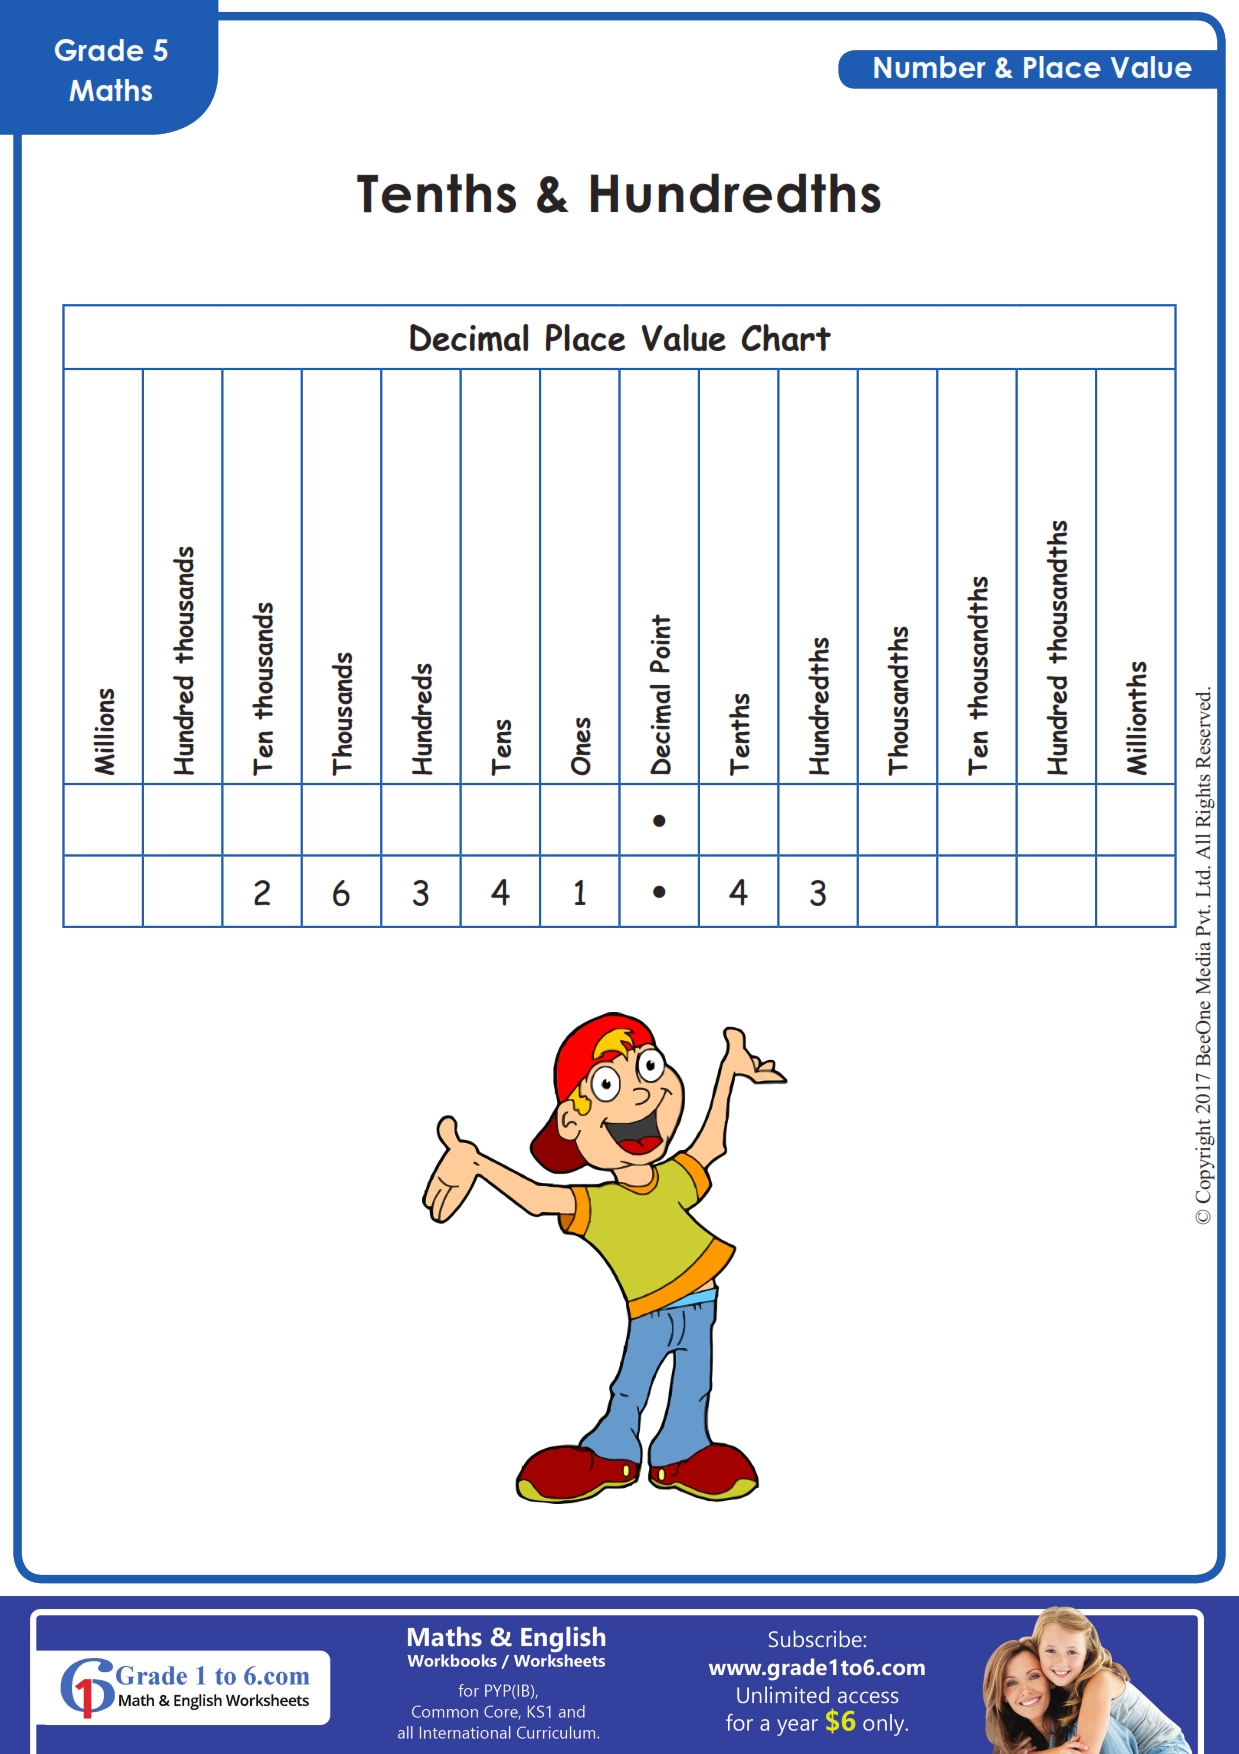 decimal place value chart easy to understand